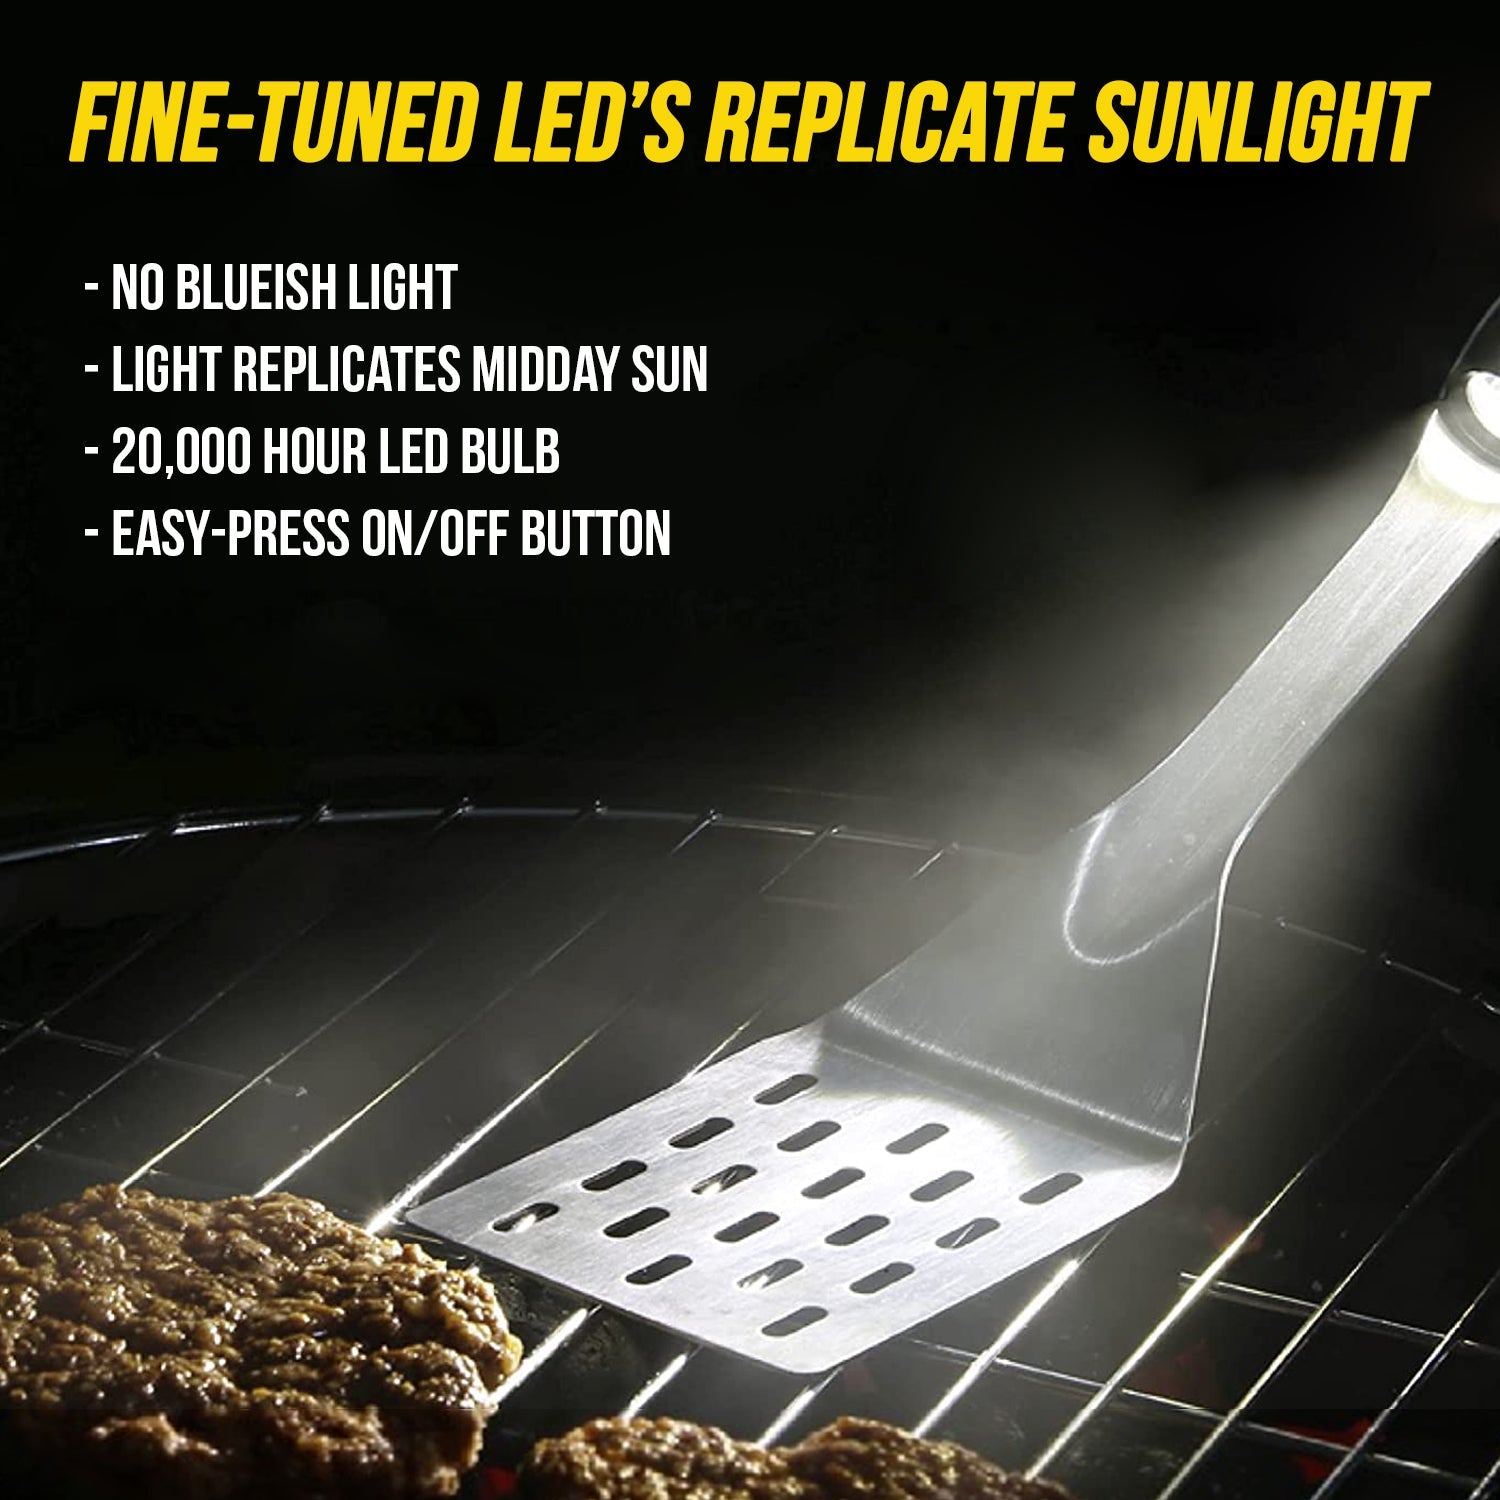 2 Piece Grill Light Gift Set by Grillight.com